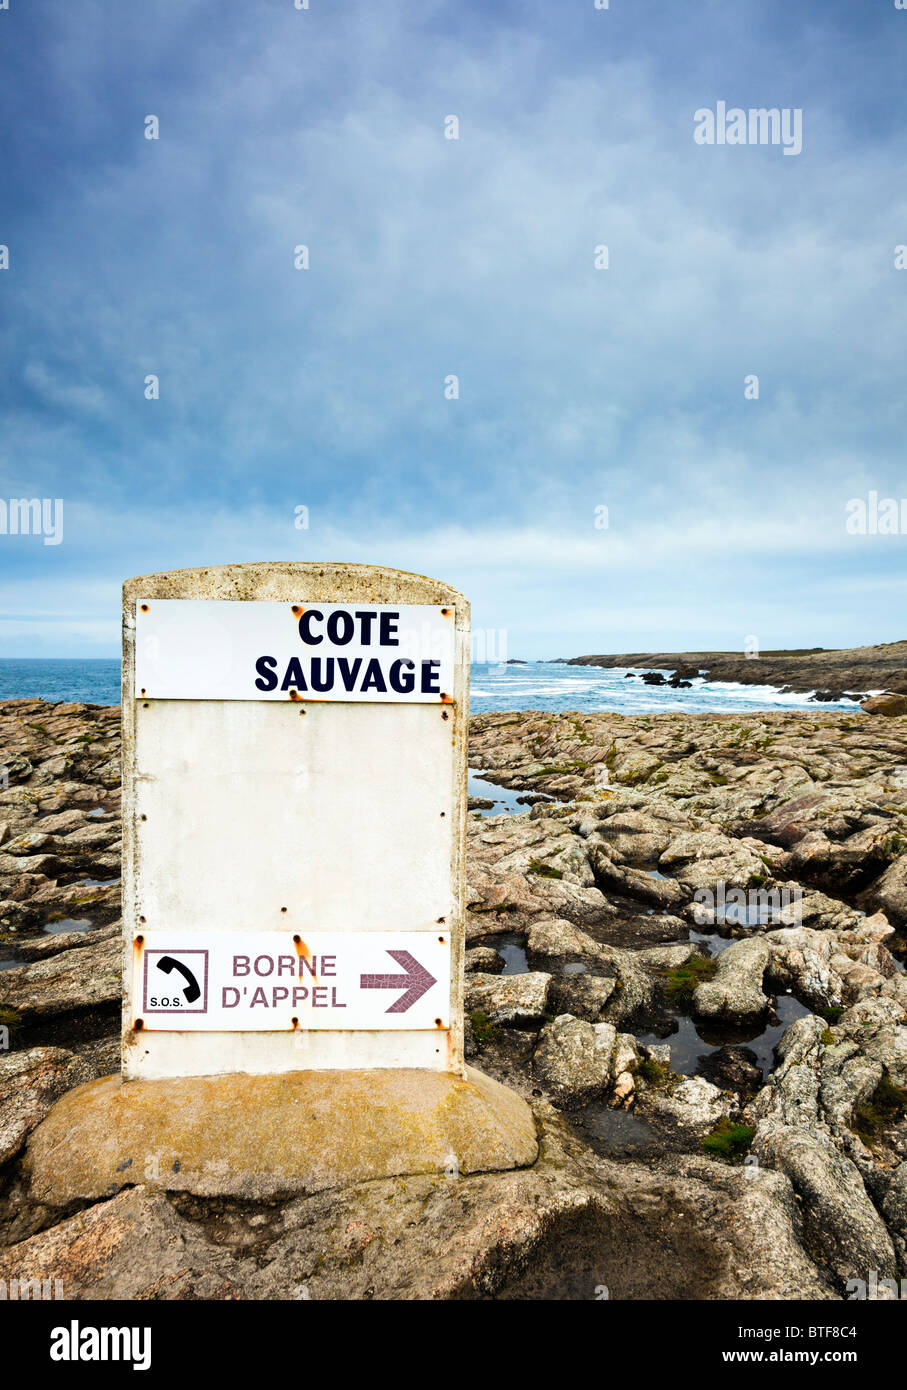 Water safety information on the Cote Sauvage, Morbihan, Brittany, France Europe Stock Photo